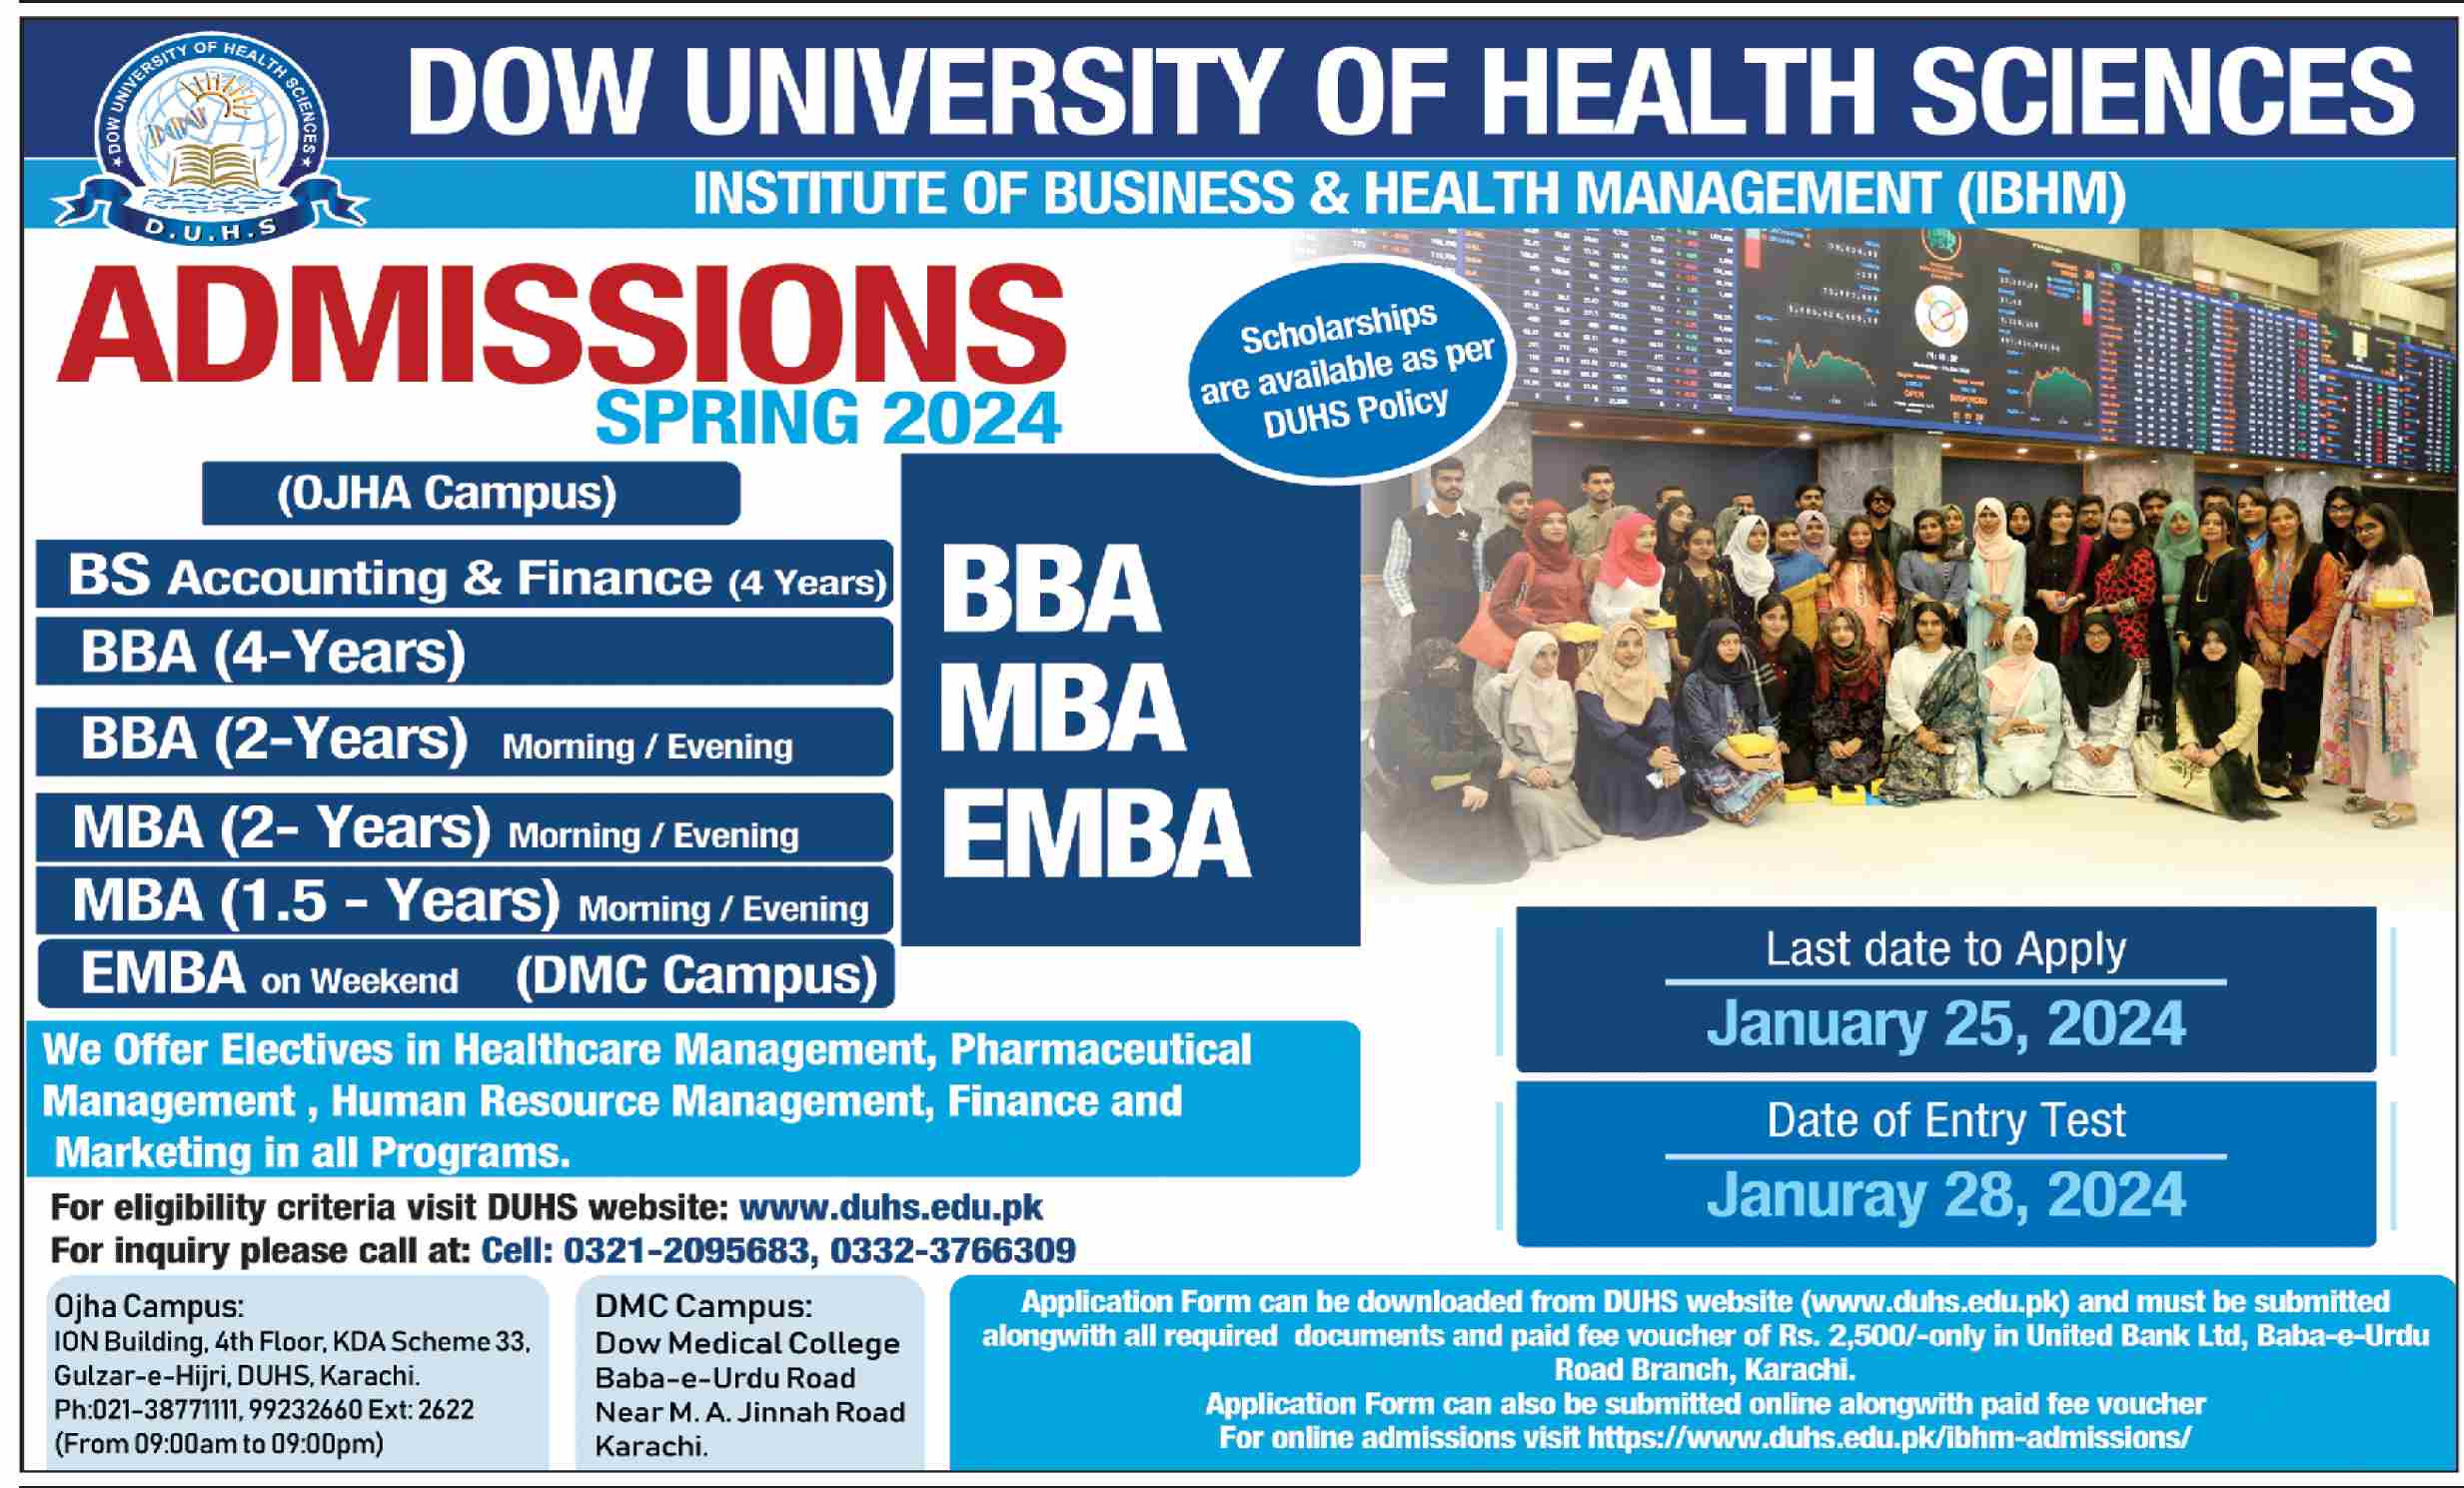 DOW University of Health Sciences IBHM Admissions Spring 25 January 2024